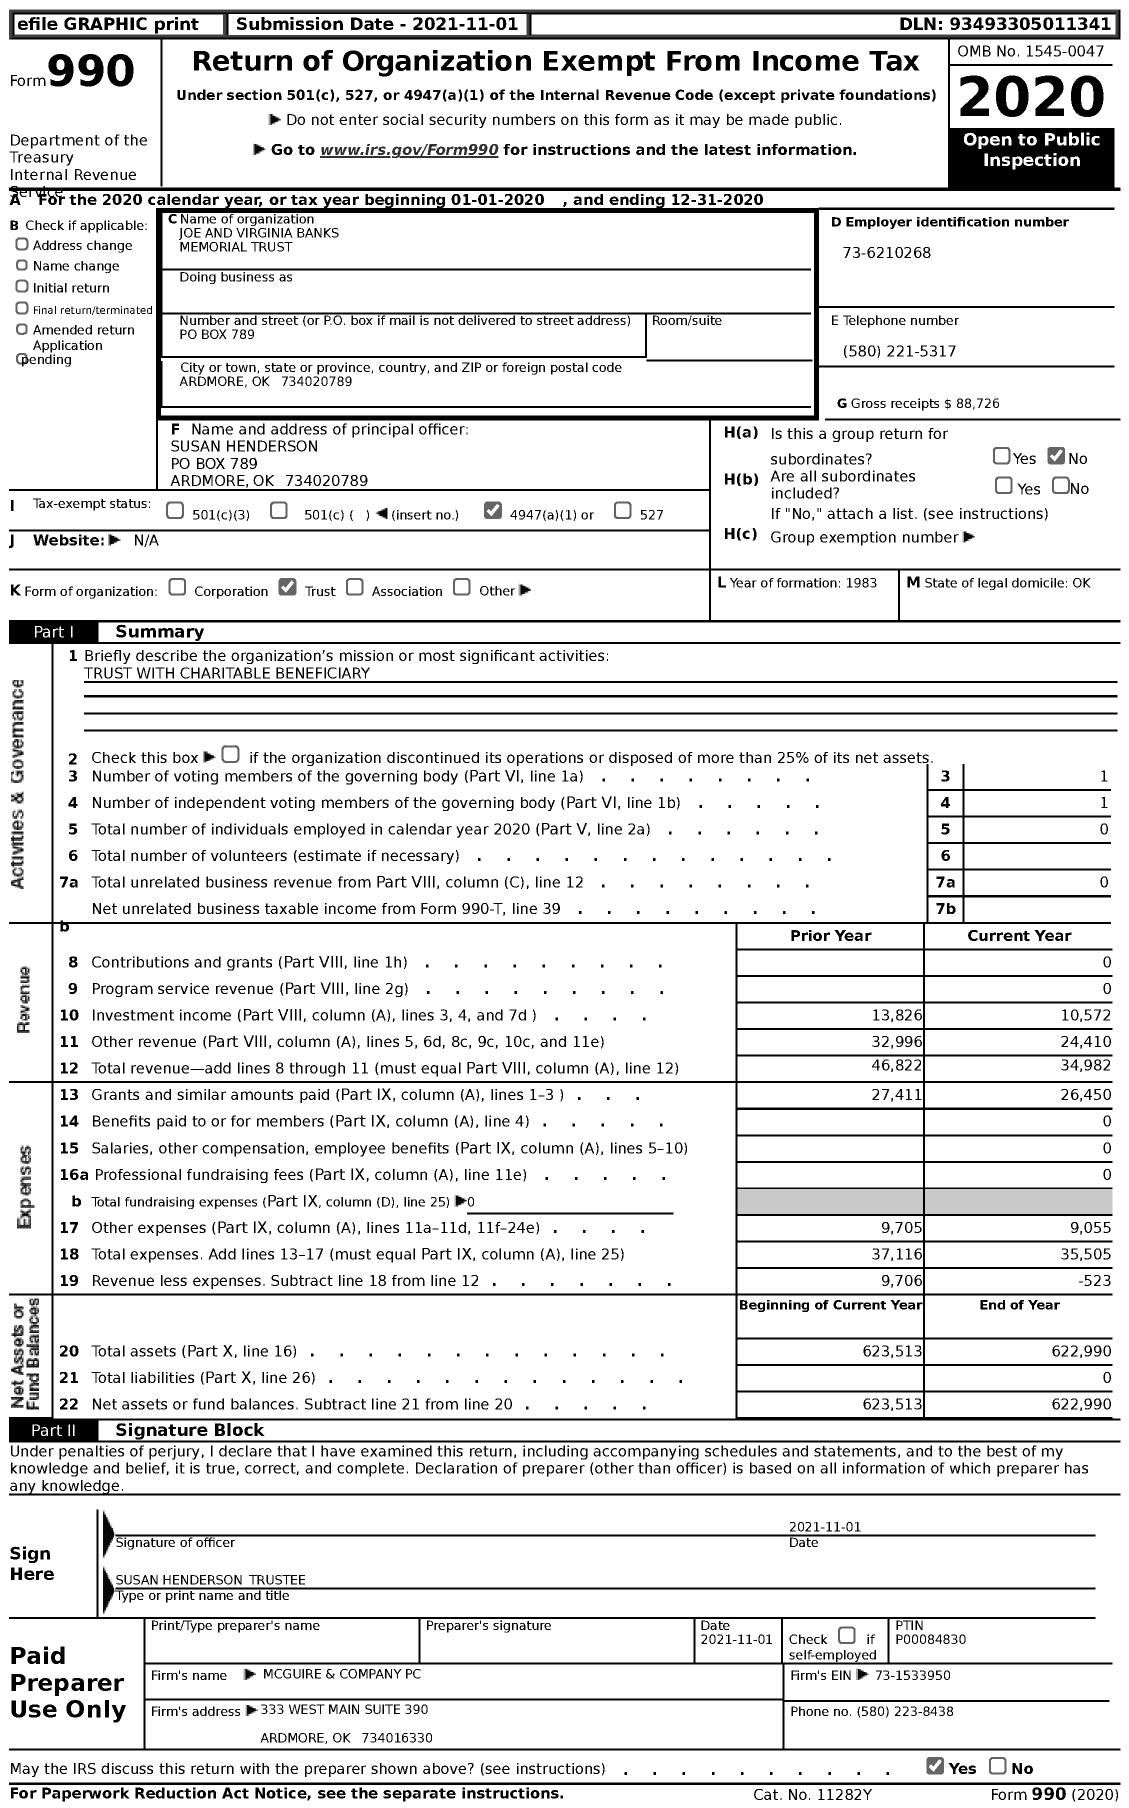 Image of first page of 2020 Form 990 for Joe and Virginia Banks Memorial Trust